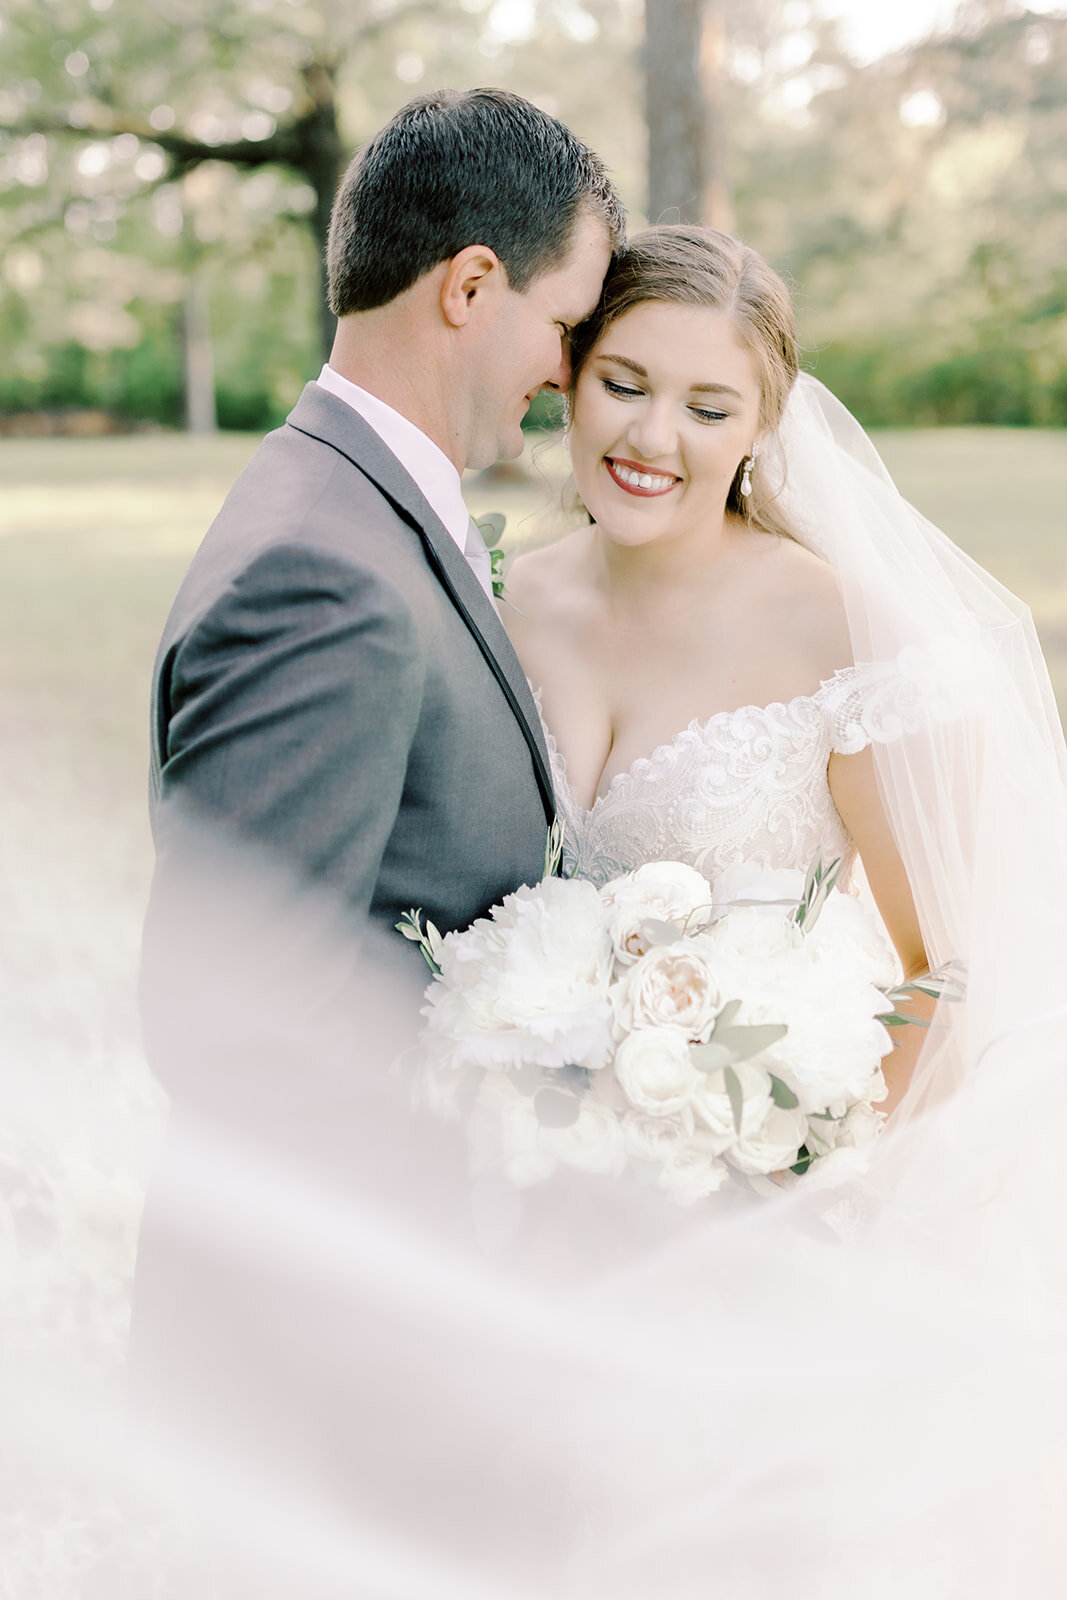 Shea-Gibson-Mississippi-Photographer-whinery wedding new_-2